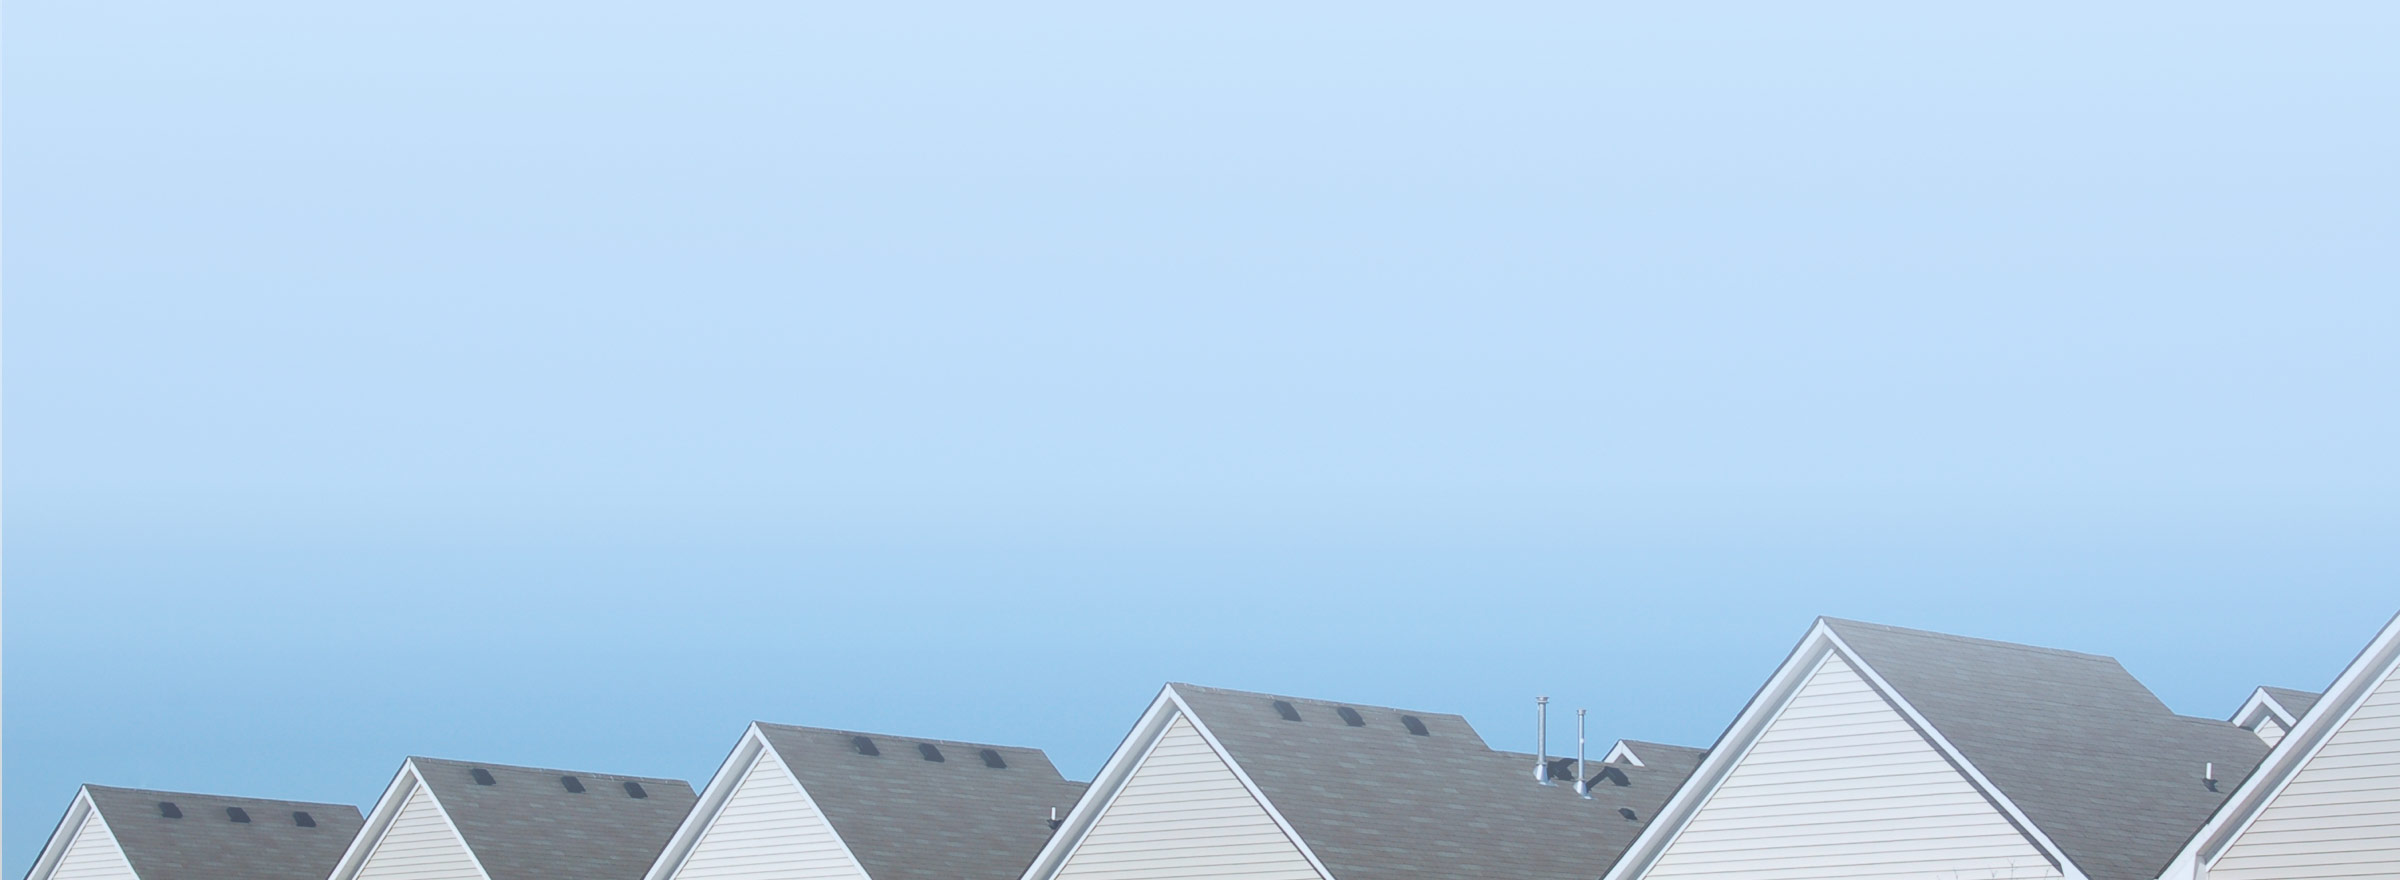 the rooftops of houses